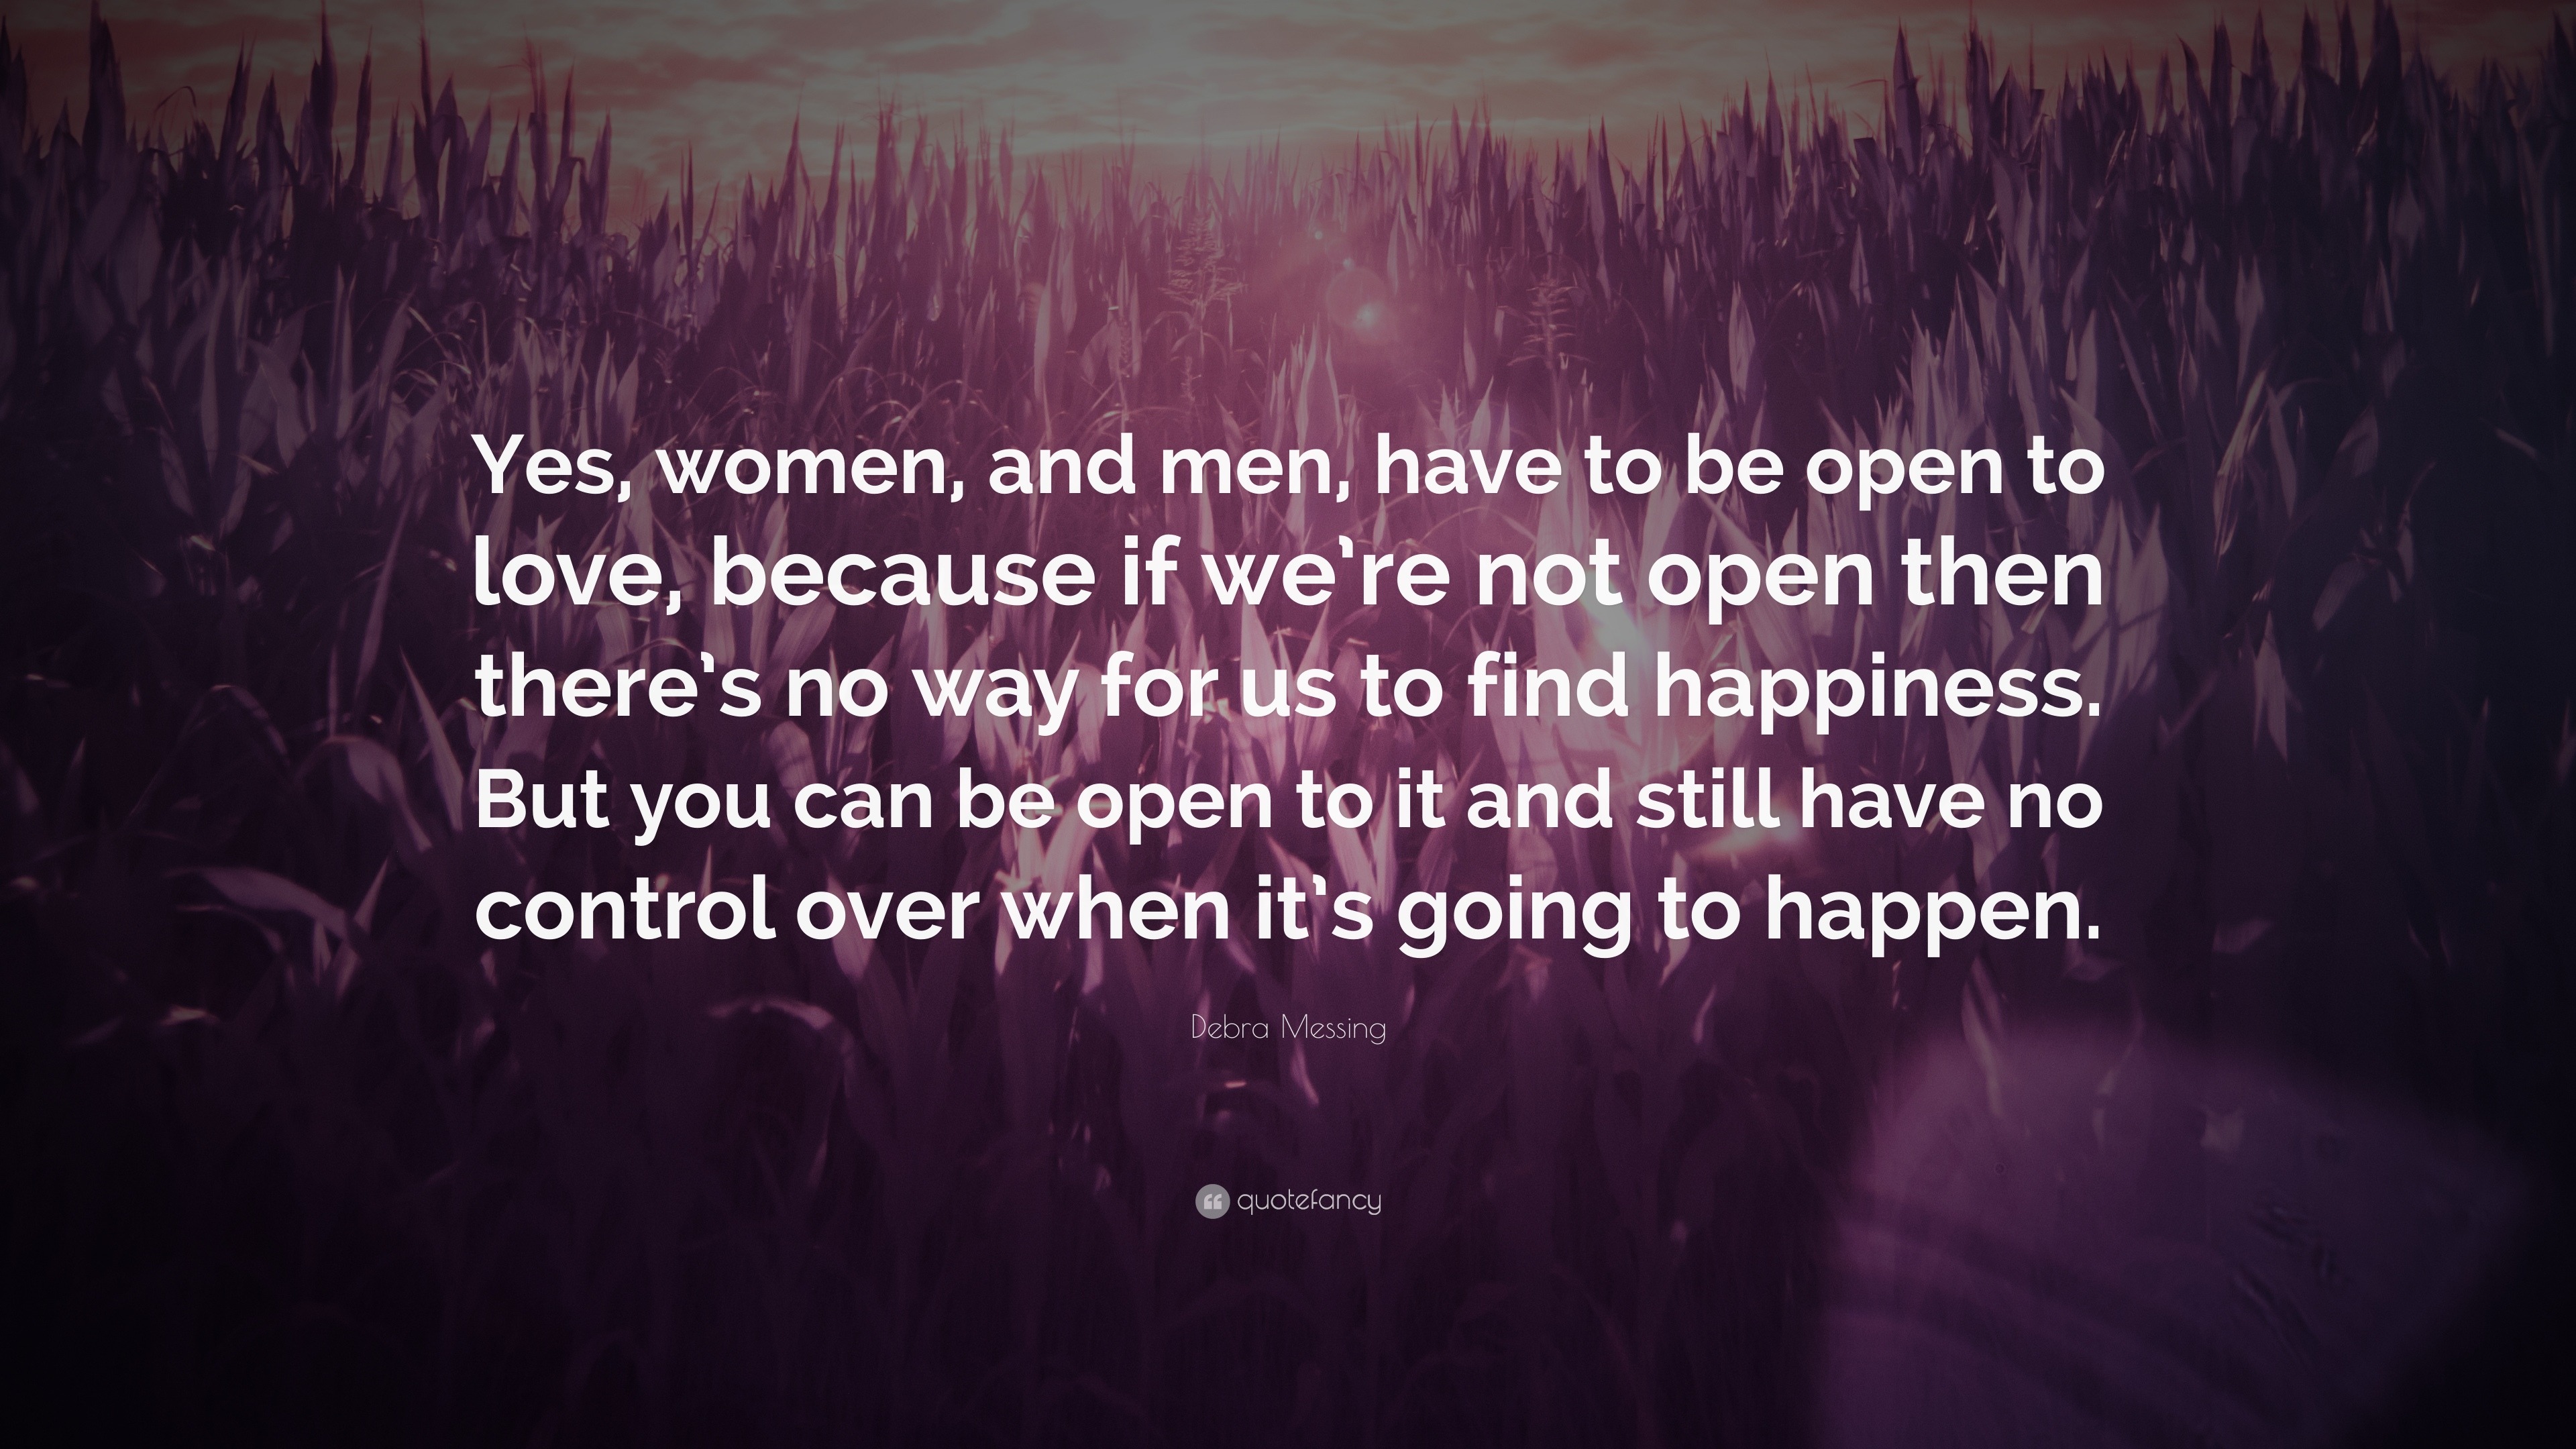 https://quotefancy.com/media/wallpaper/3840x2160/1022025-Debra-Messing-Quote-Yes-women-and-men-have-to-be-open-to-love.jpg